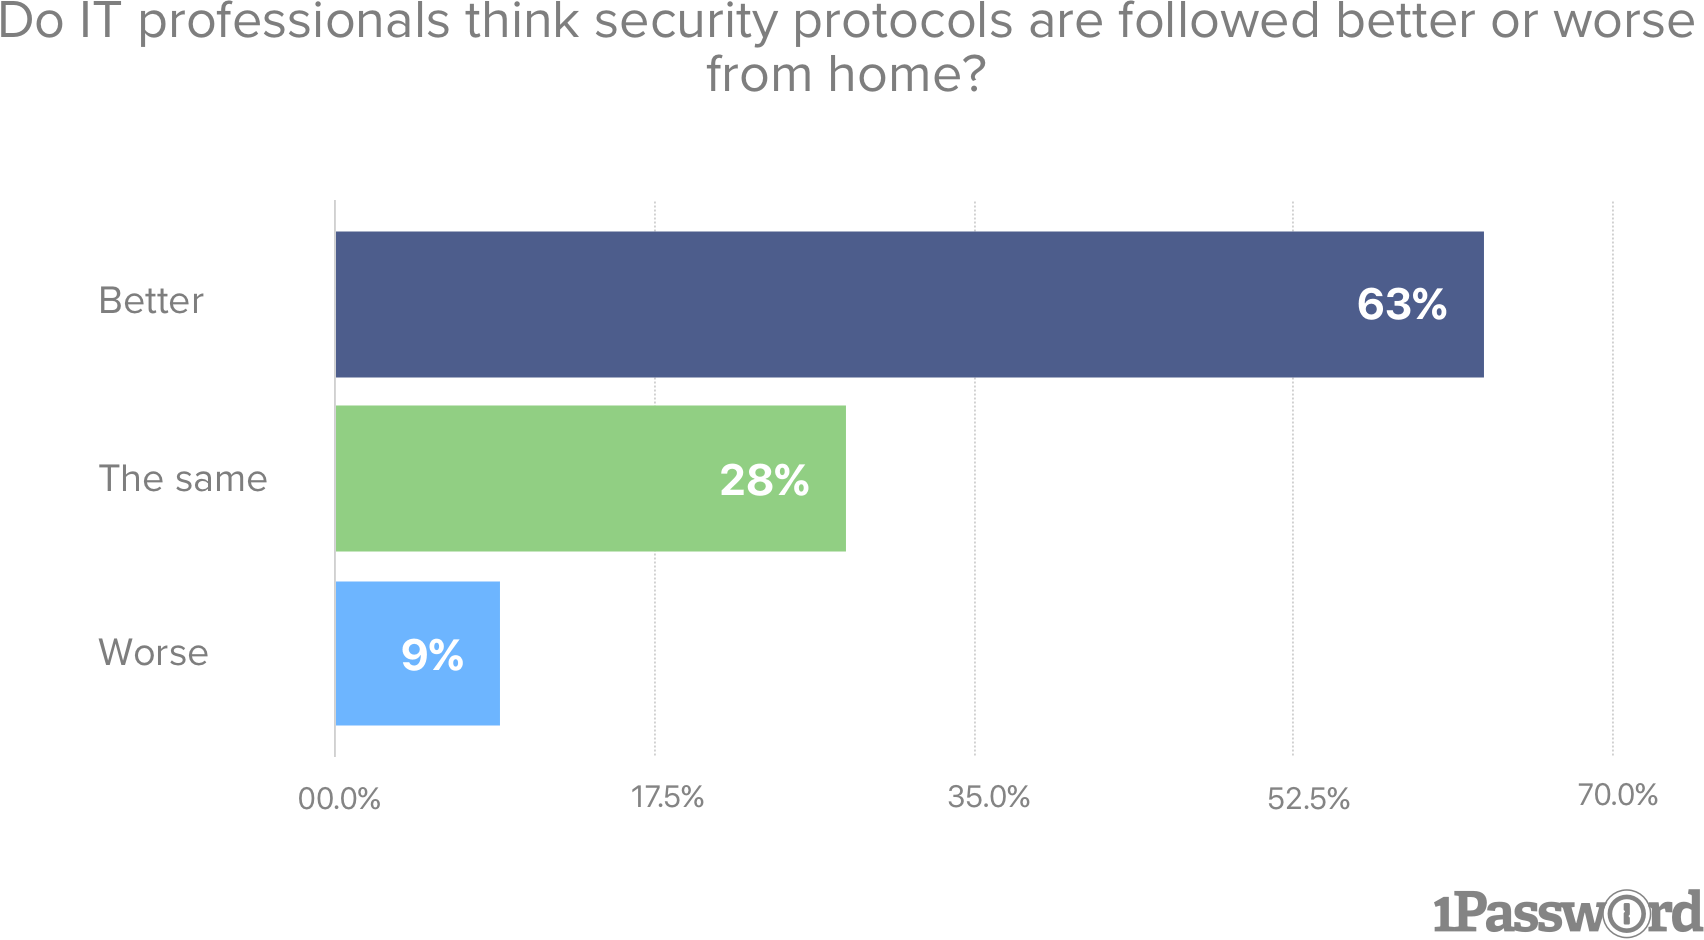 Do IT professionals think security protocols are followed better or worse from home?